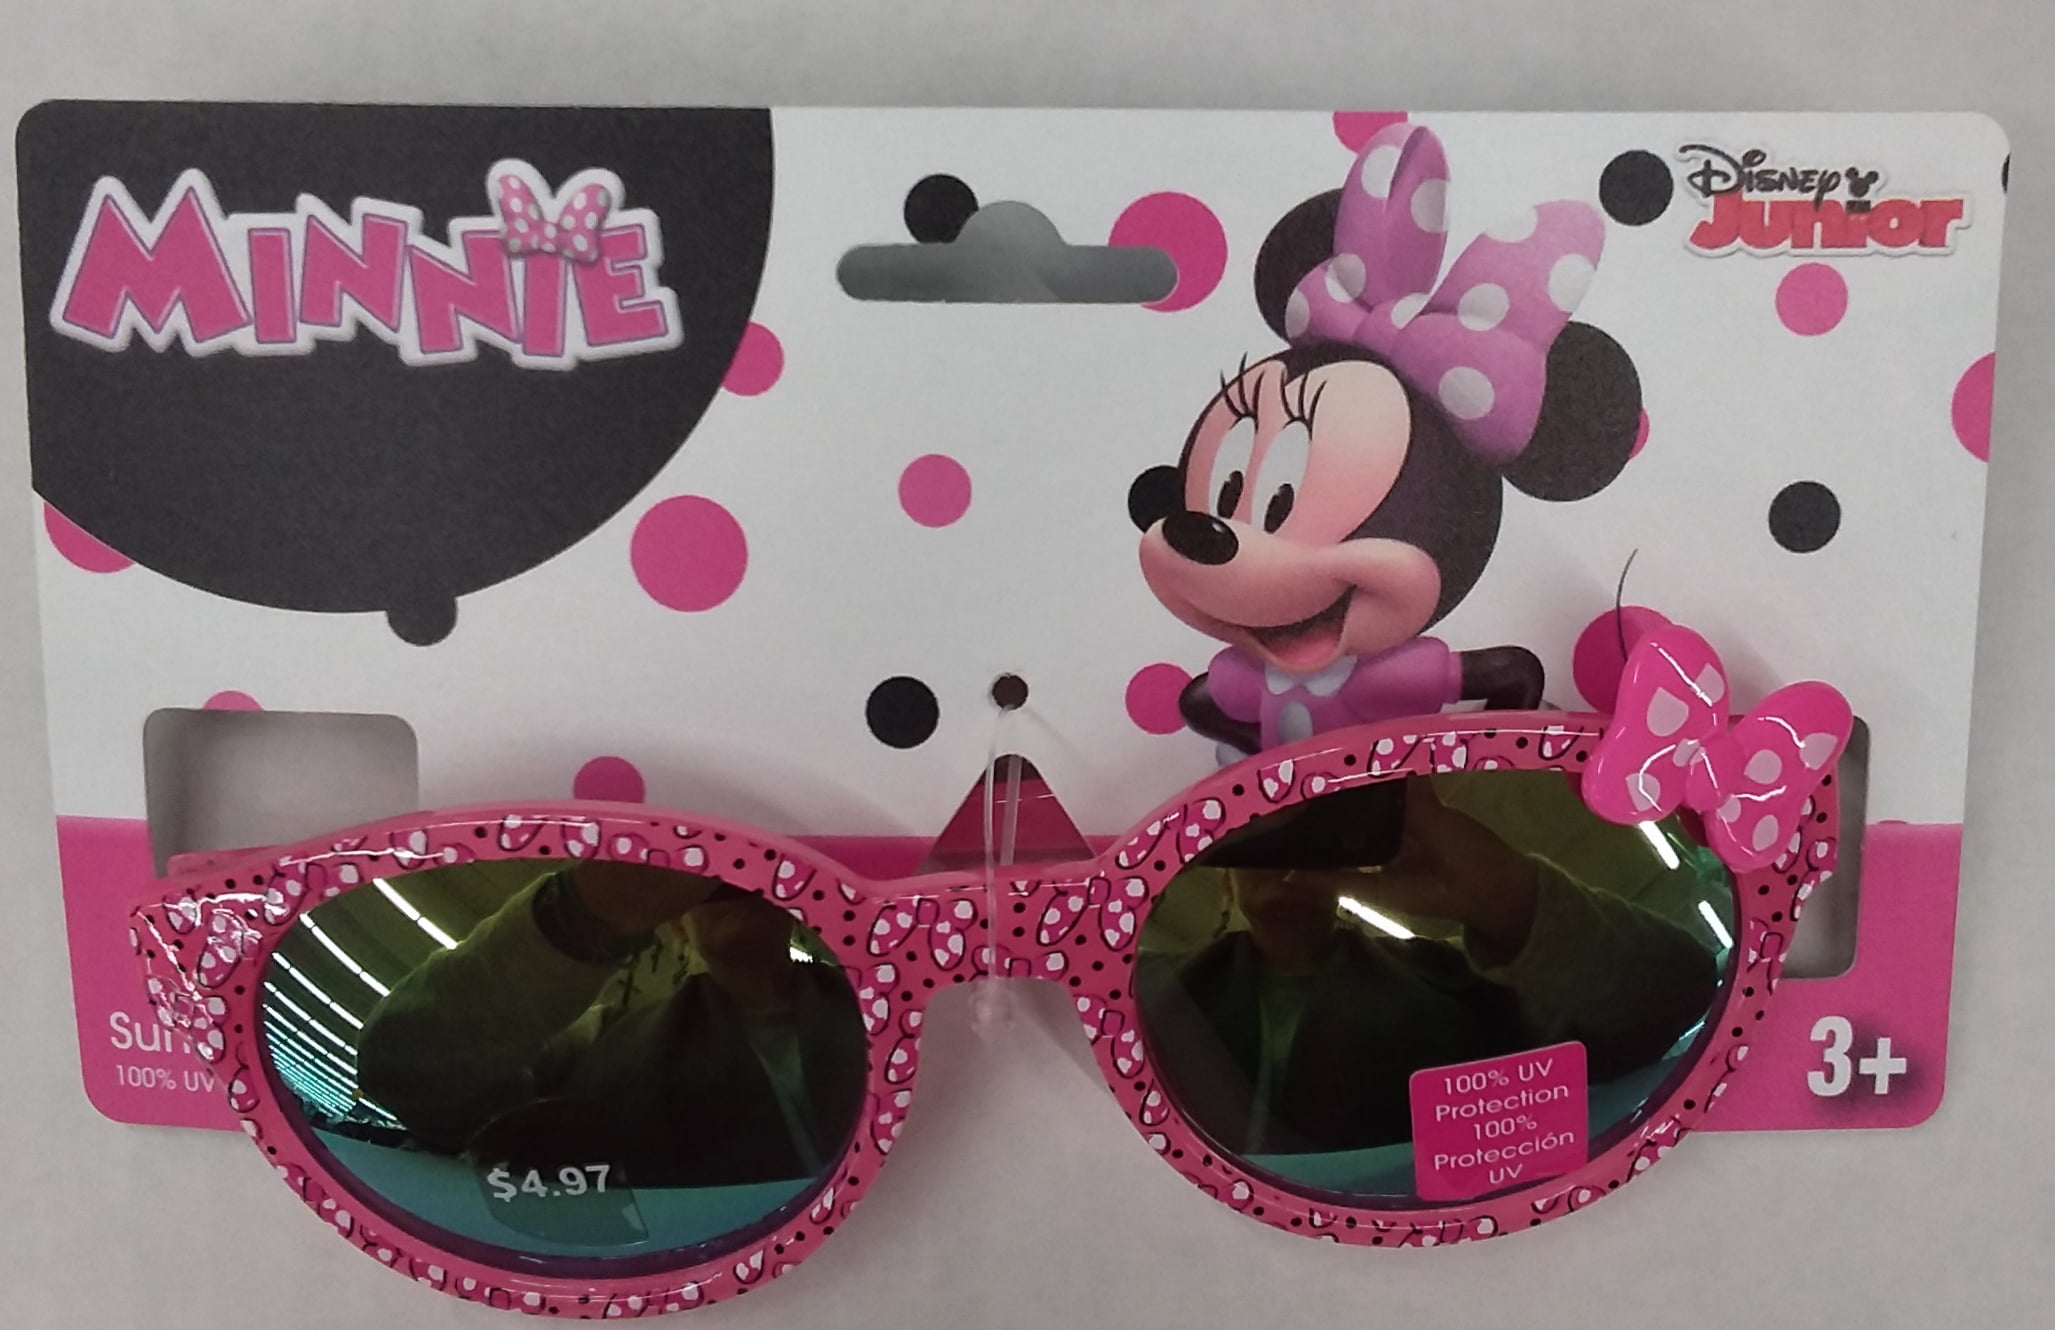 Disneys Minnie Mouse Minnie Sunglasses with Case Set for Toddlers 